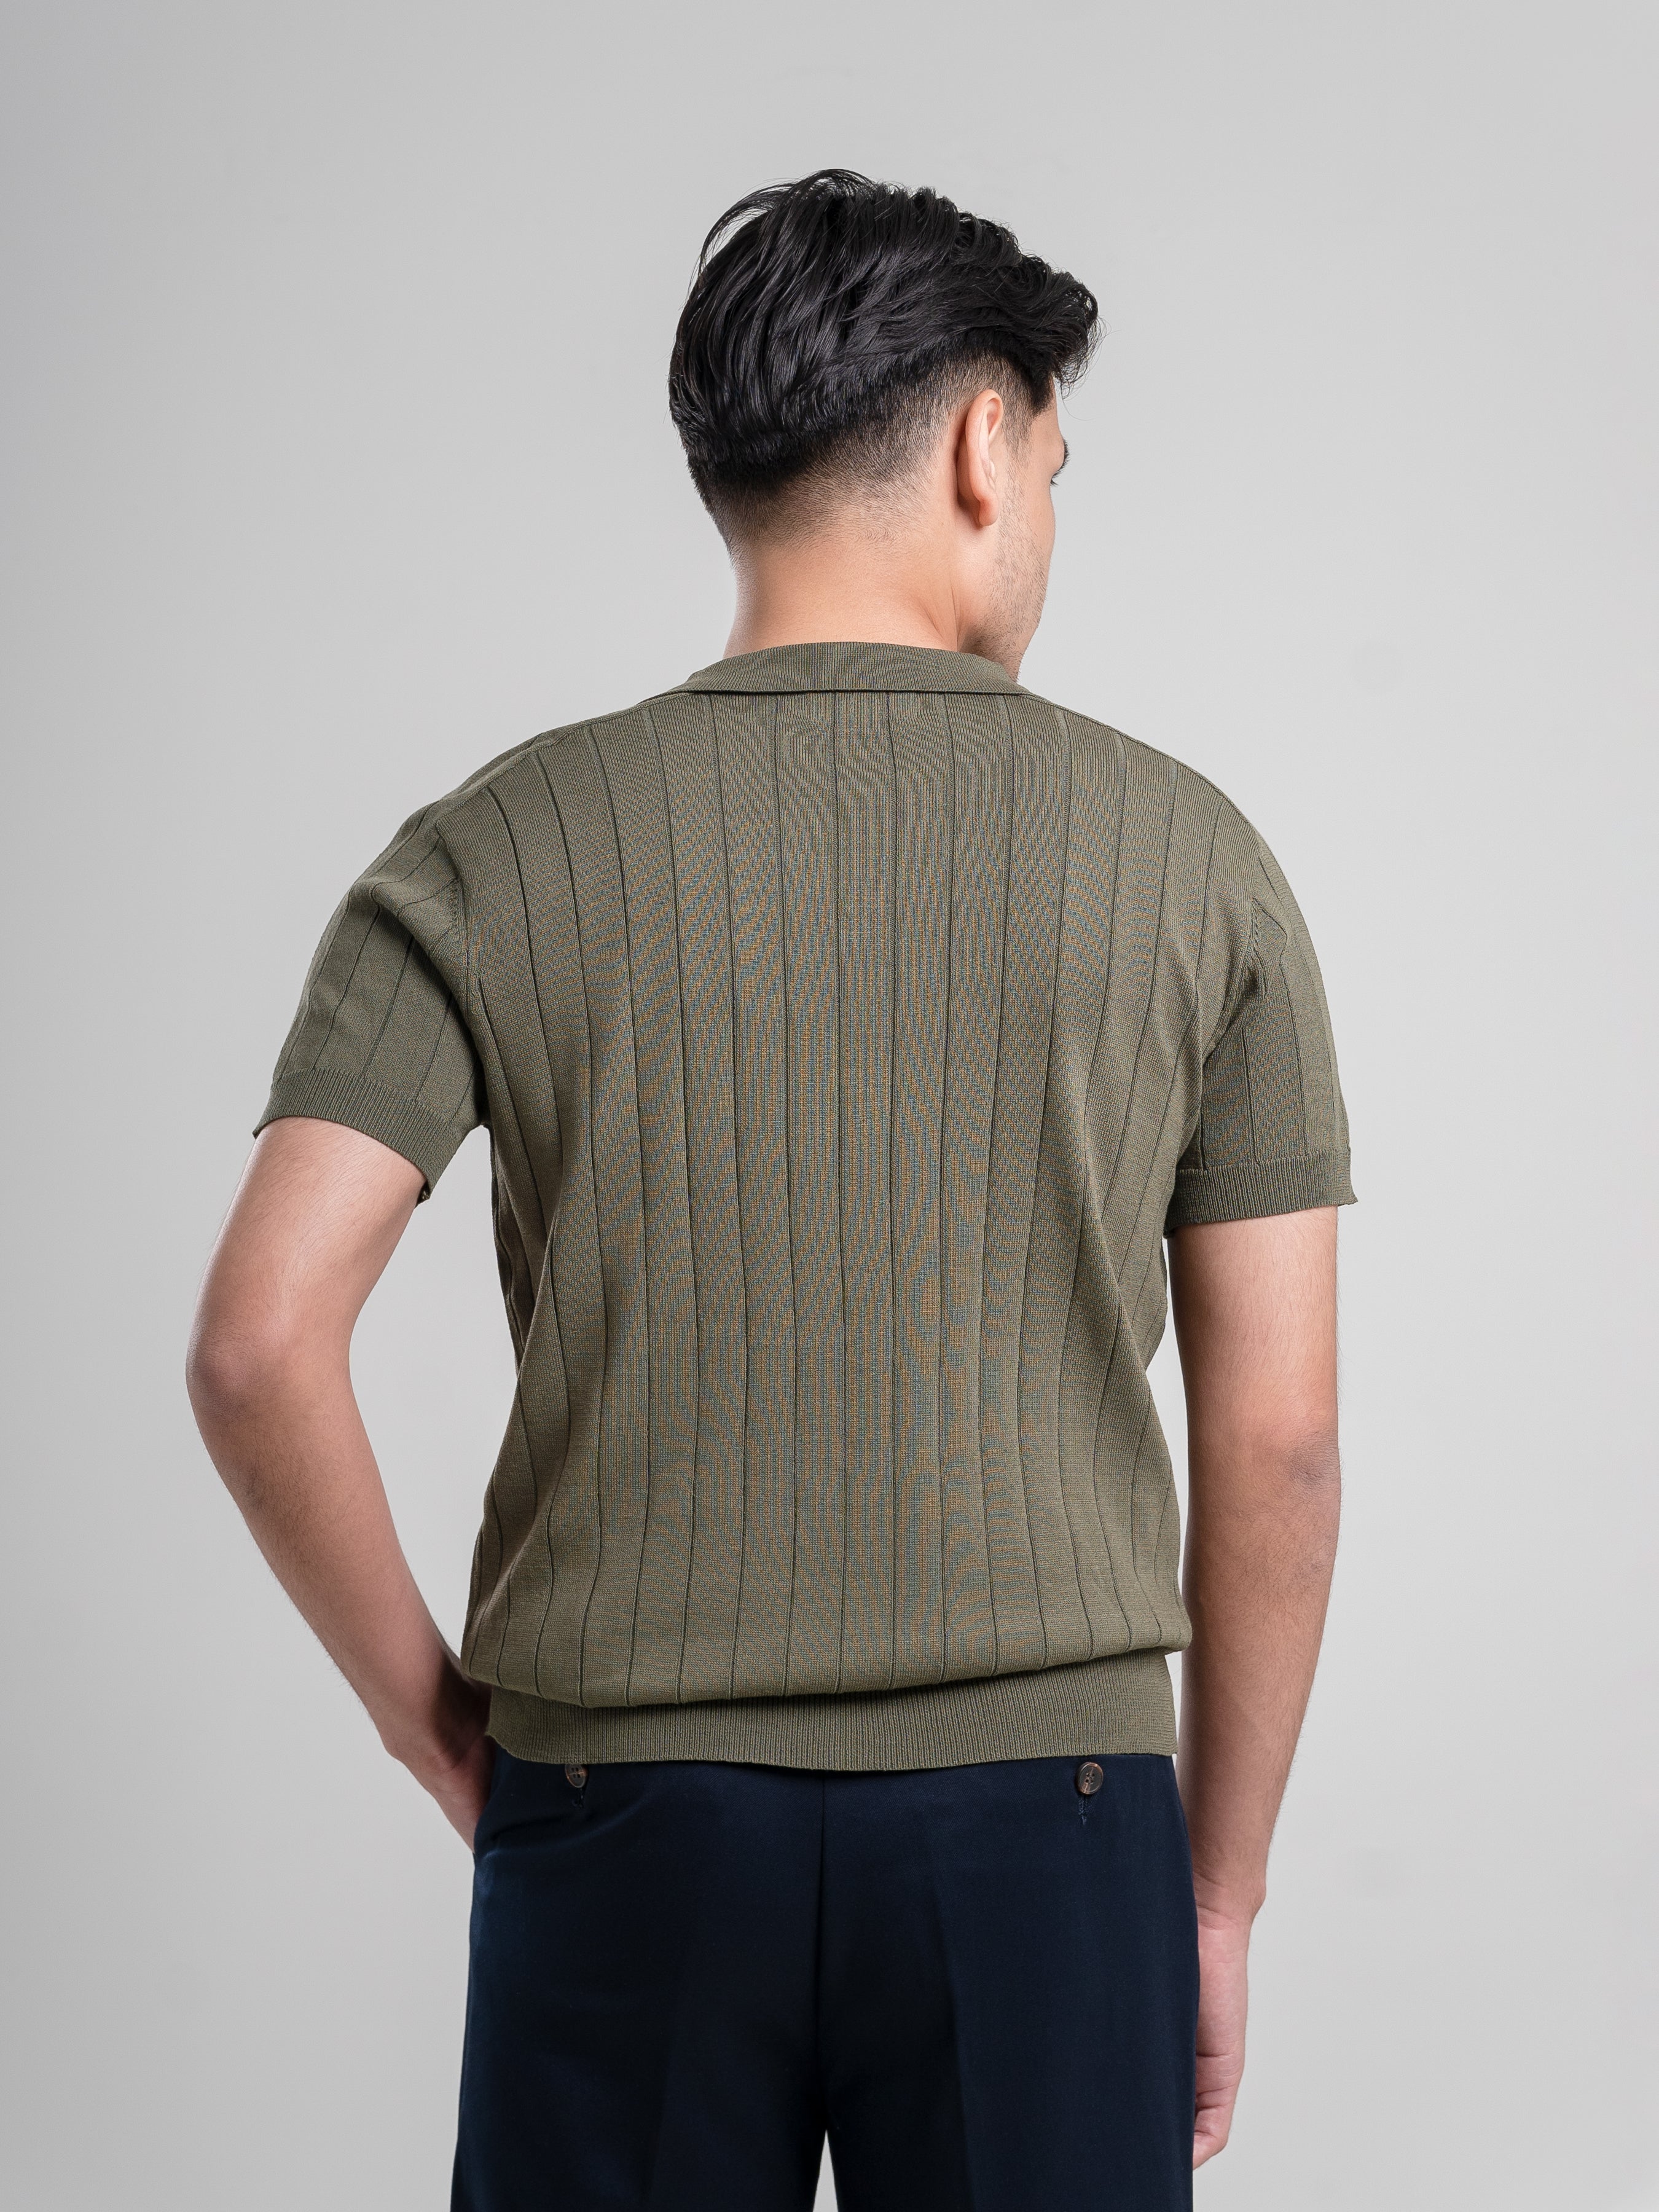 Dylan Knit Tee - Olive Green